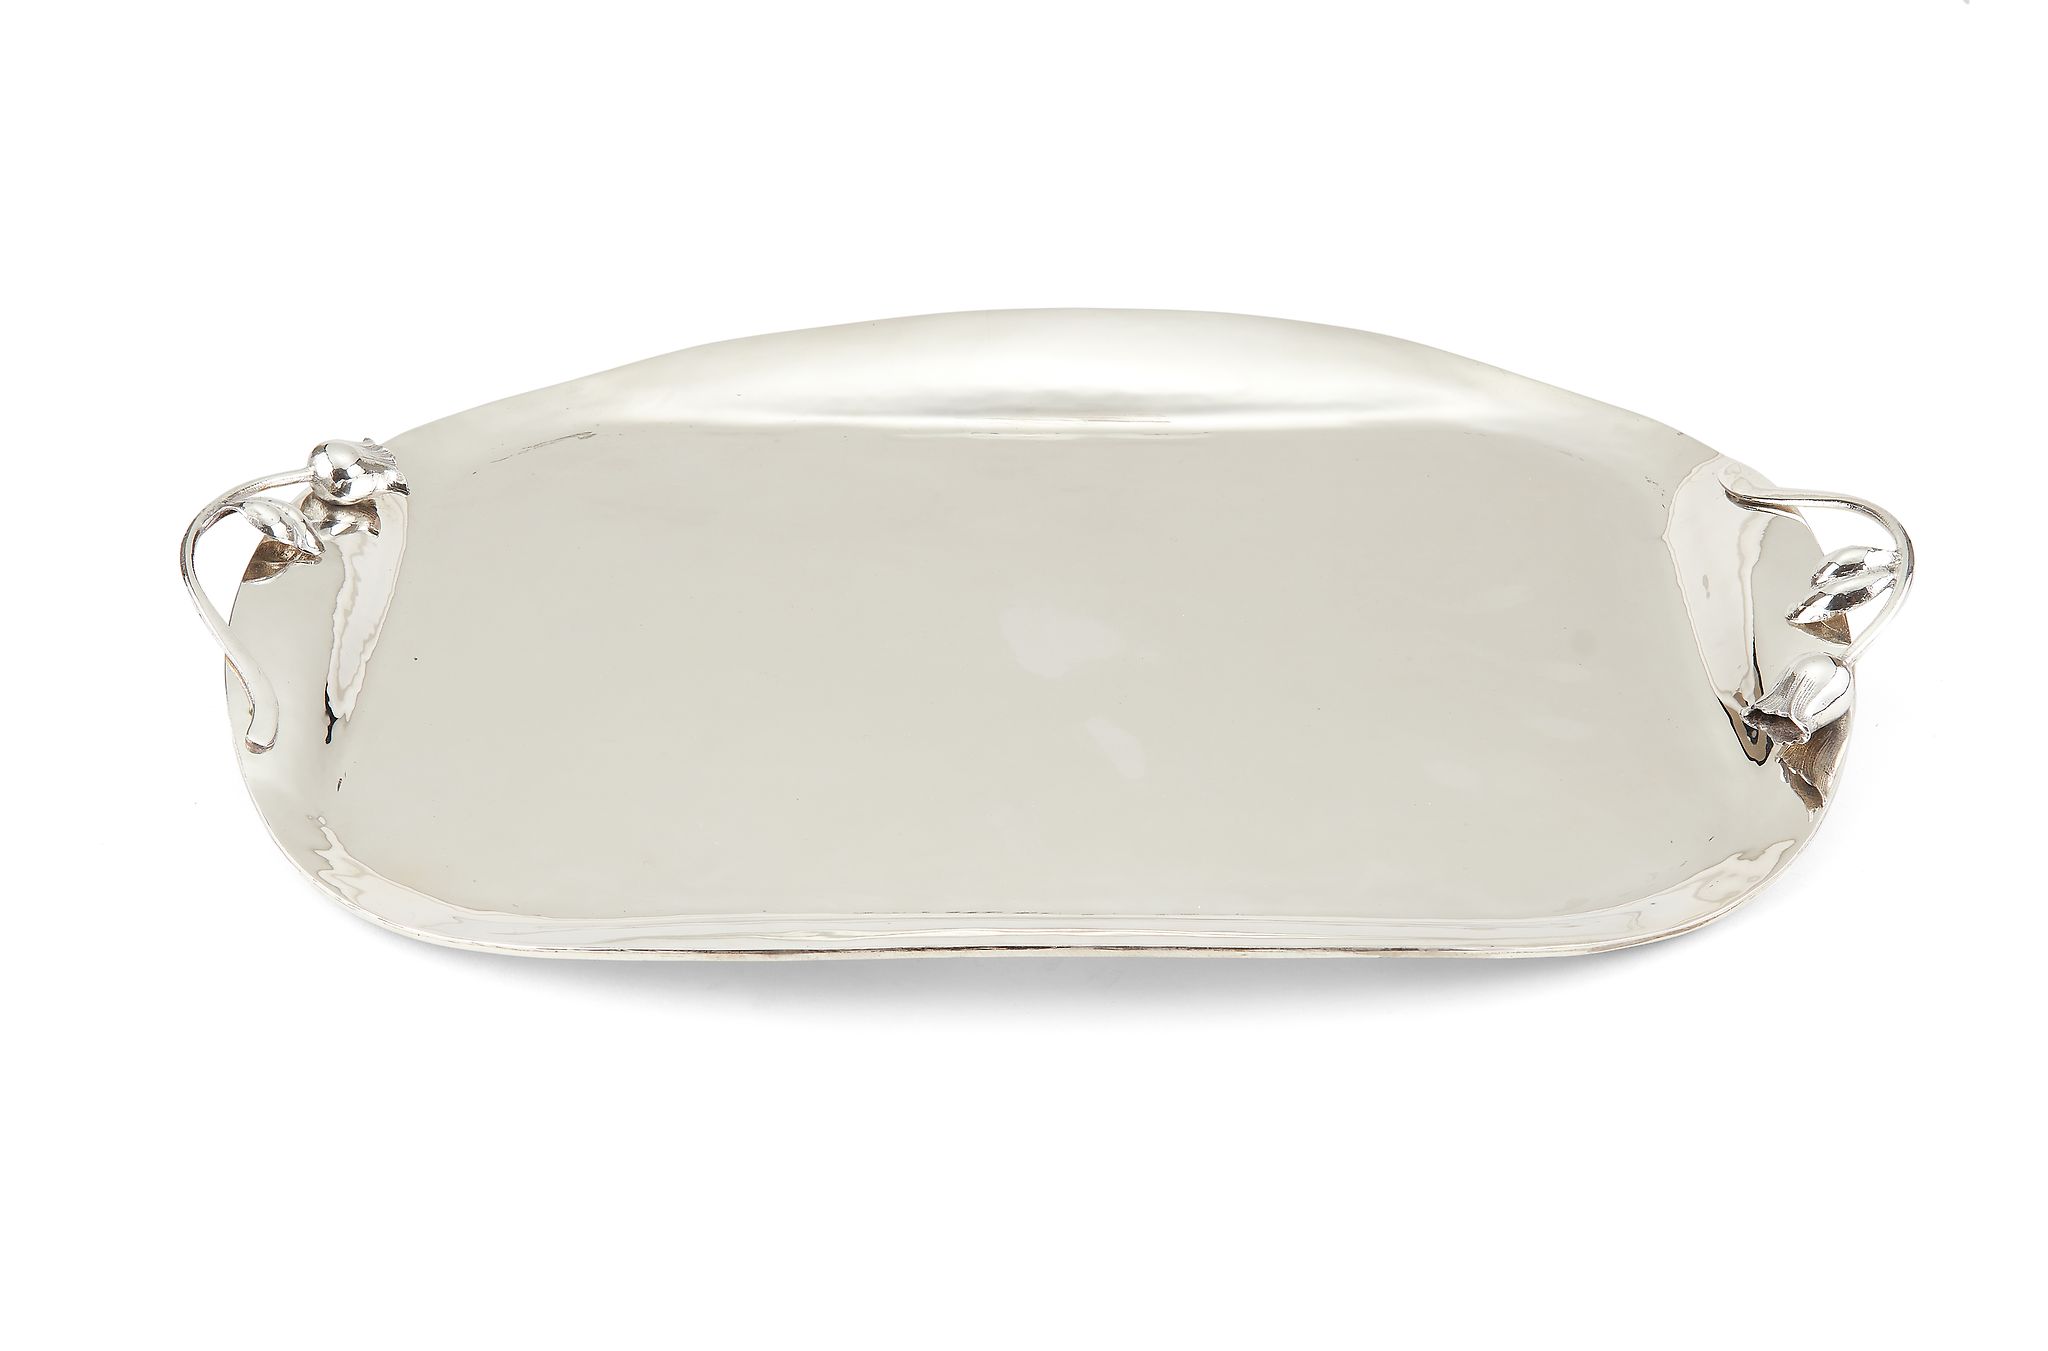 A Turkish silver coloured oblong tray by Melda, stamped Spedal 925 Melda , late 20th century, with